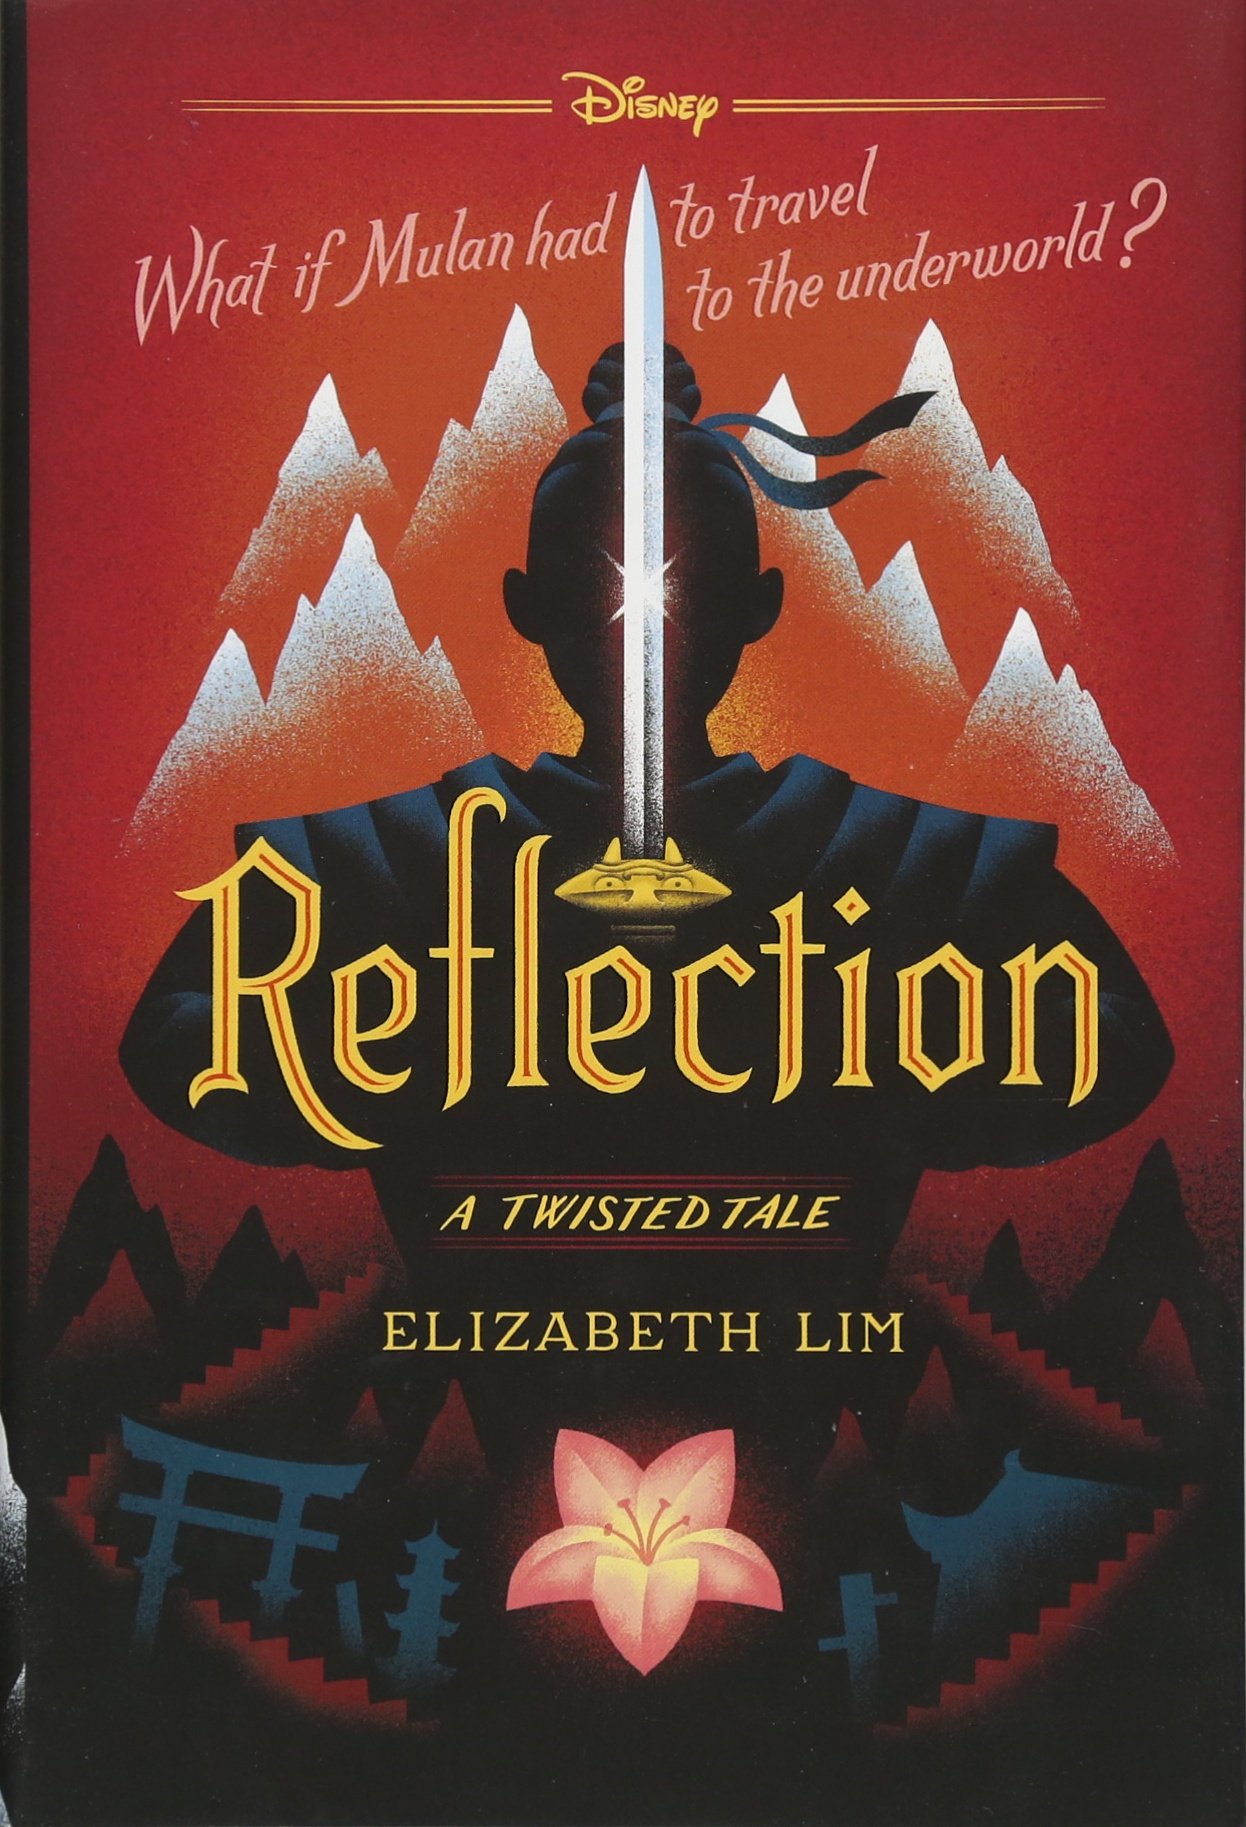 Image for "Reflection"